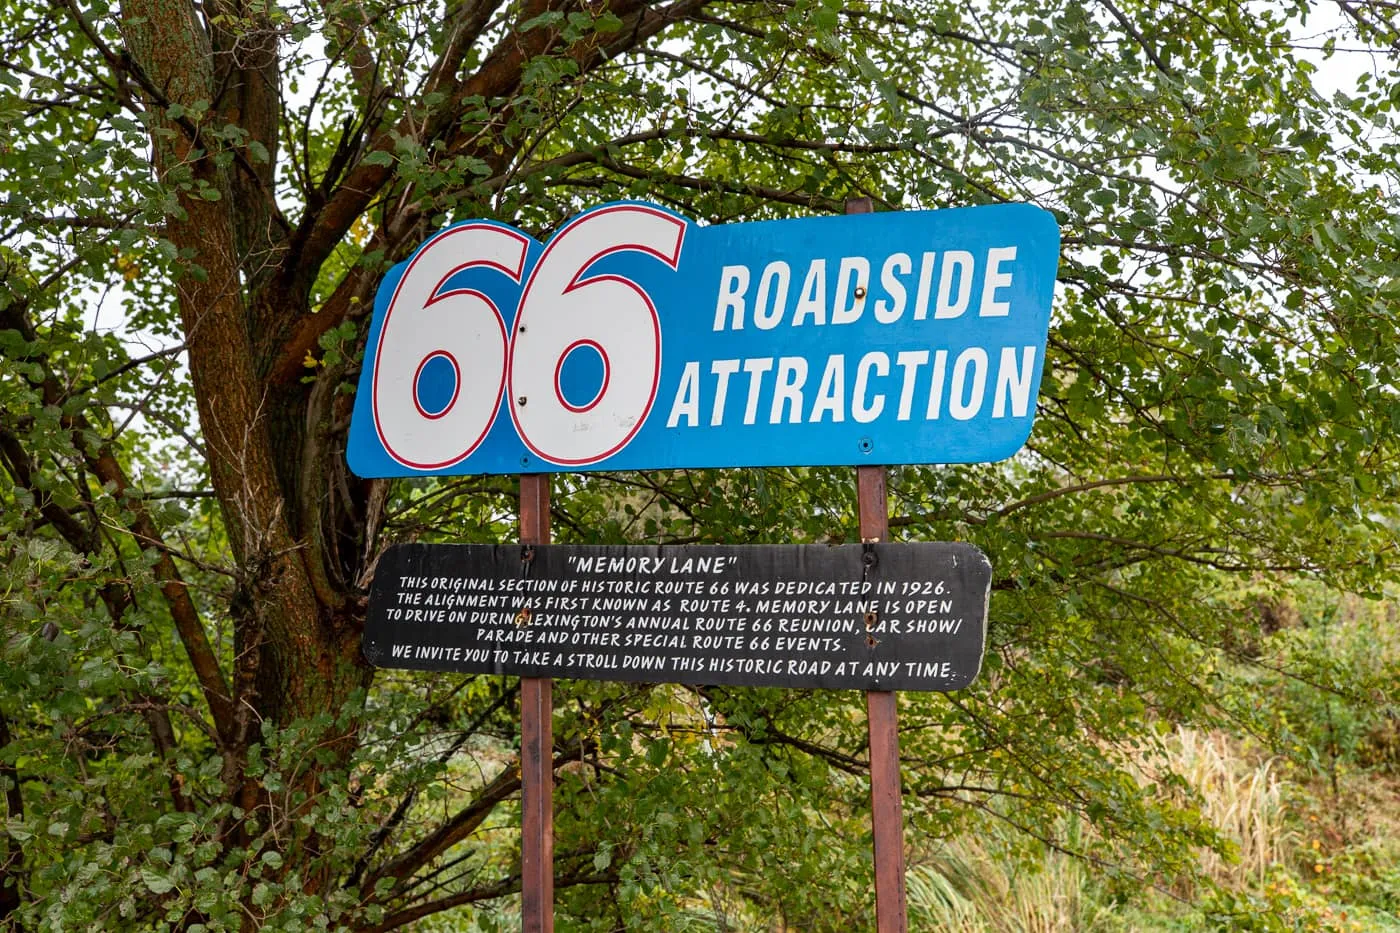 Roadside Attraction sign at Route 66 Memory Lane in Lexington, Illinois